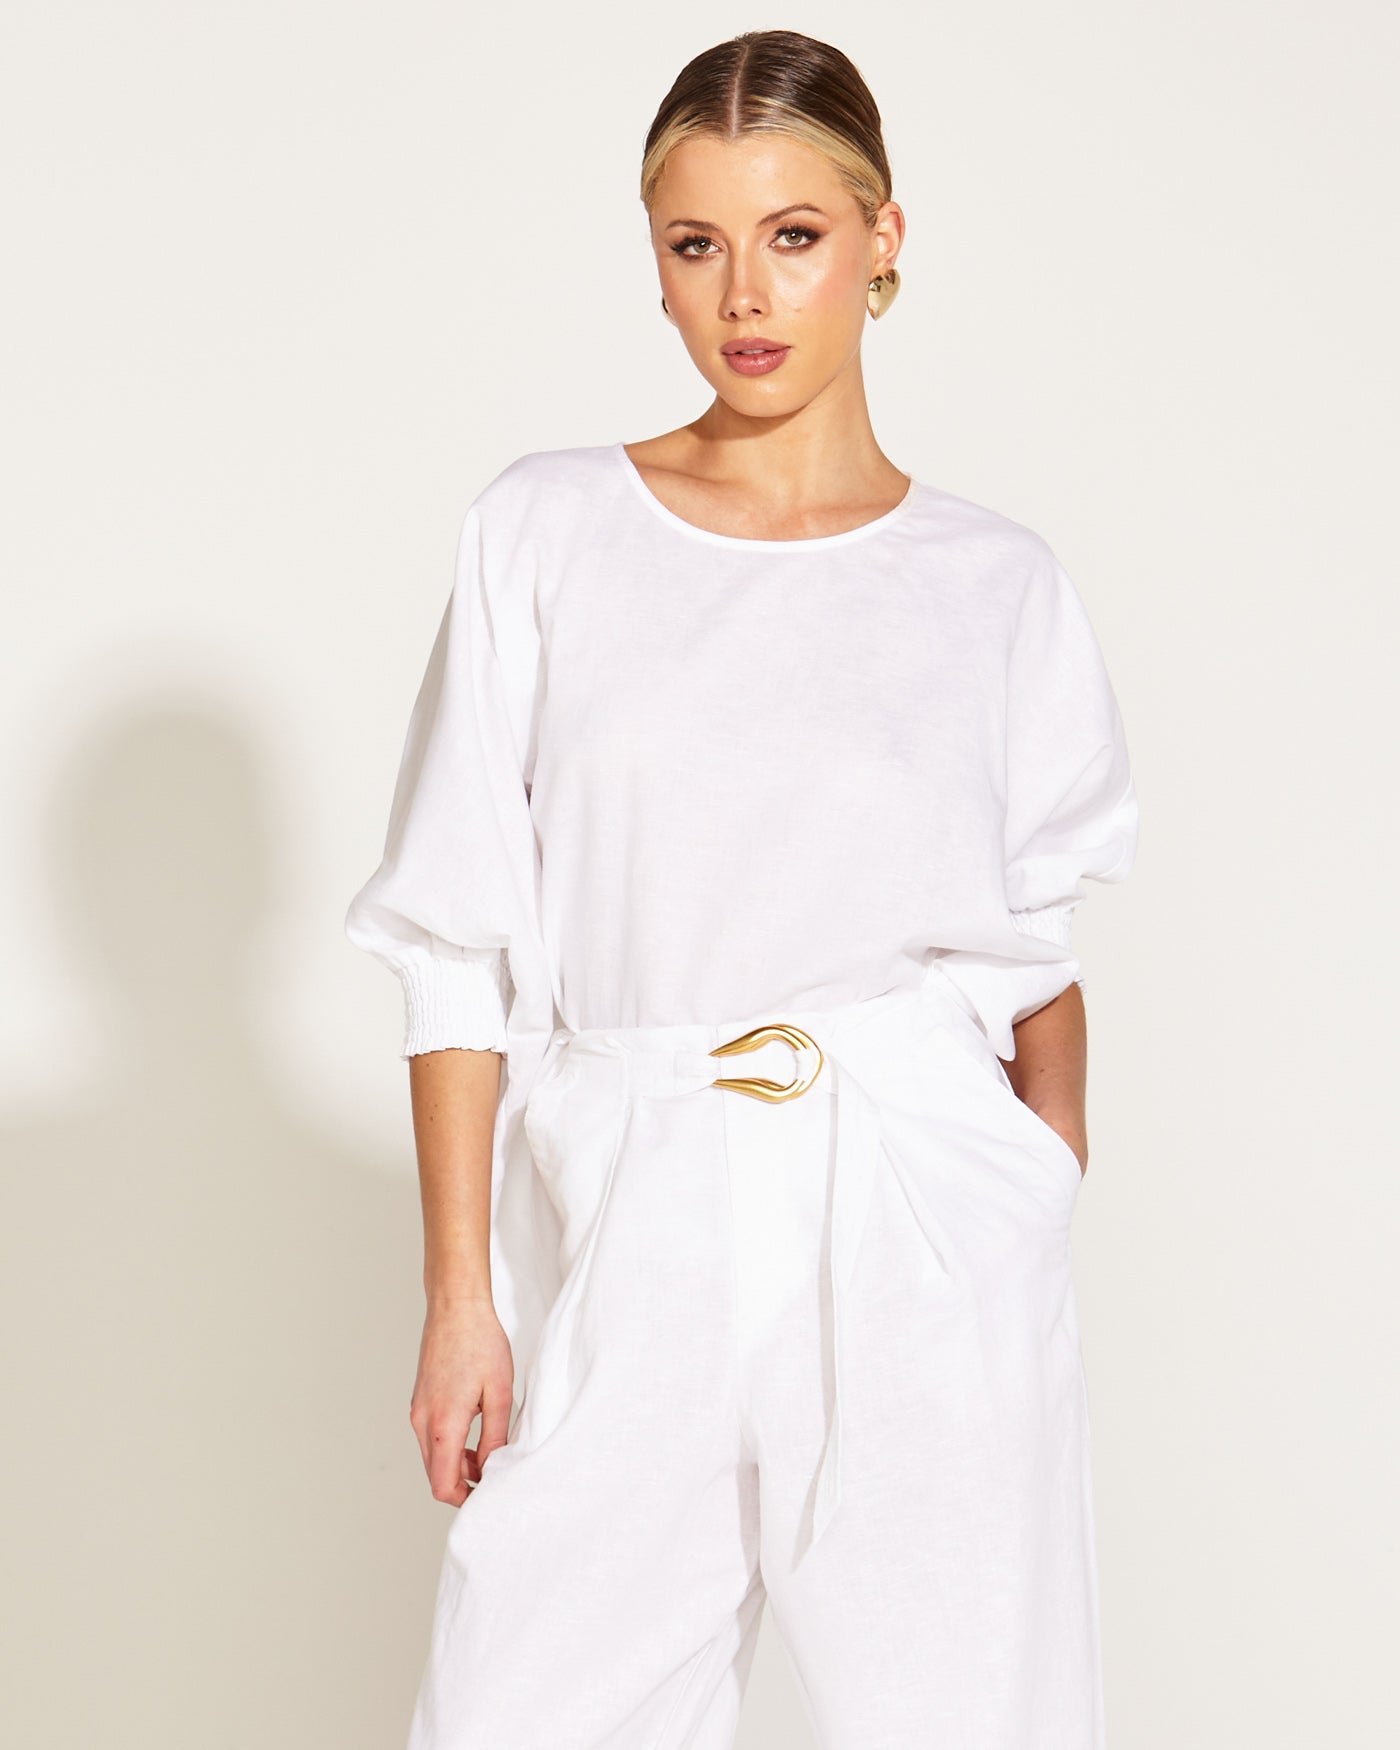 Fate+Becker A Walk In The Park Linen Oversized Batwing Top - White